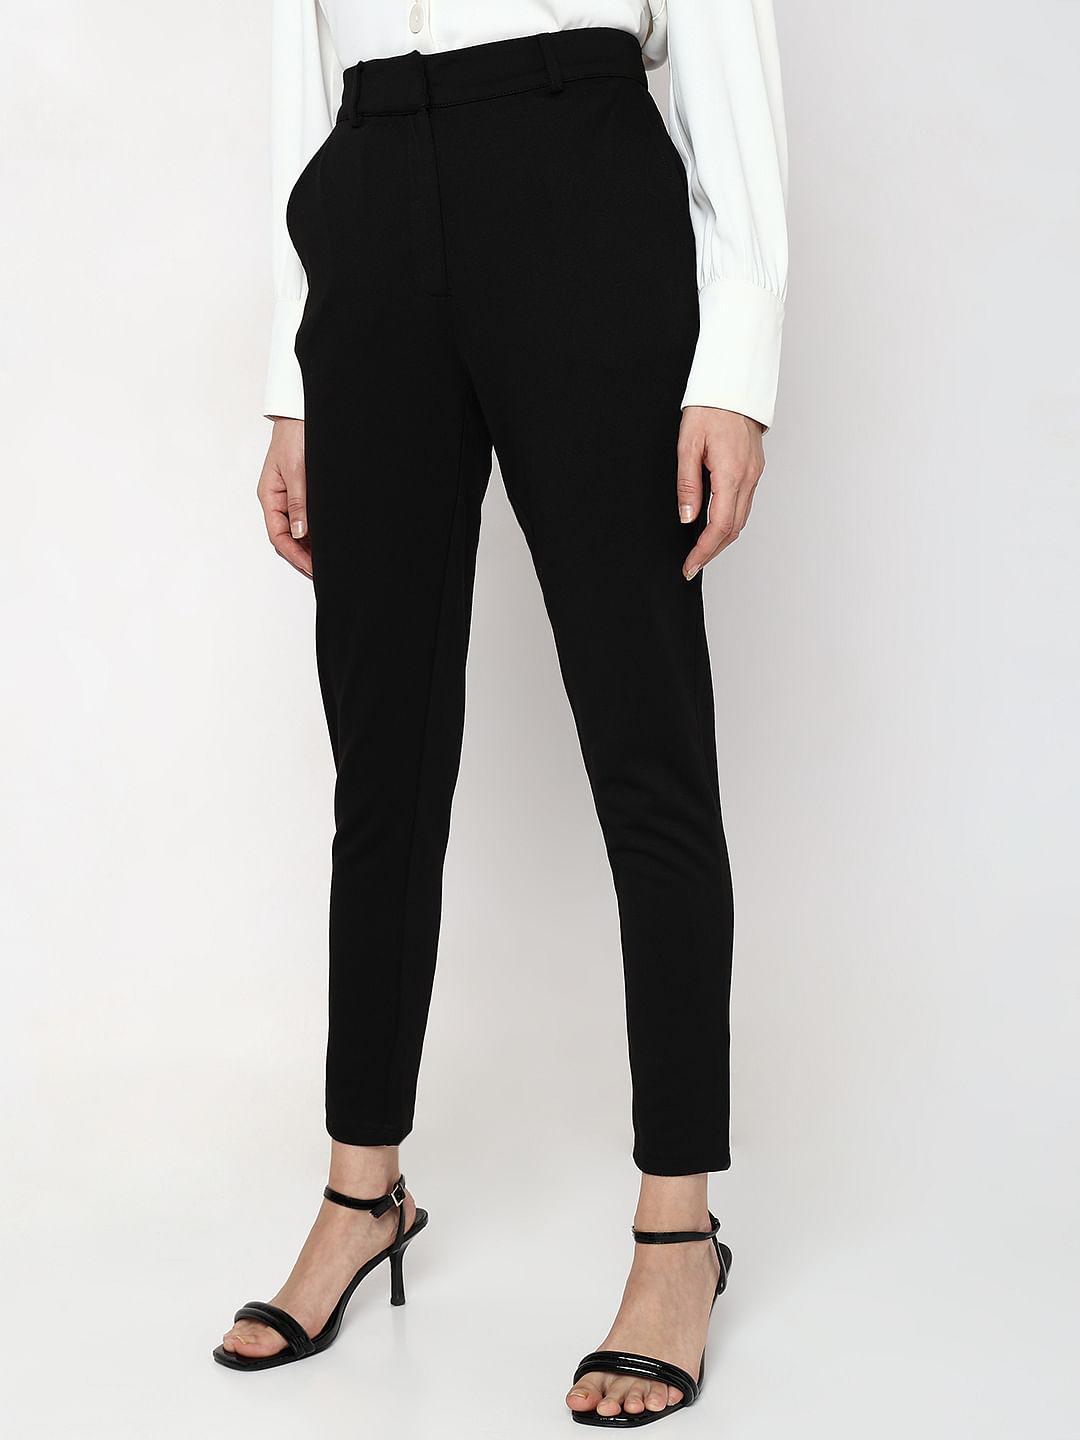 Out Class Office wear straight pants trousers styles||Trendy Designs\Ideas  | Latest african fashion dresses, Corporate fashion, Fashionable work outfit